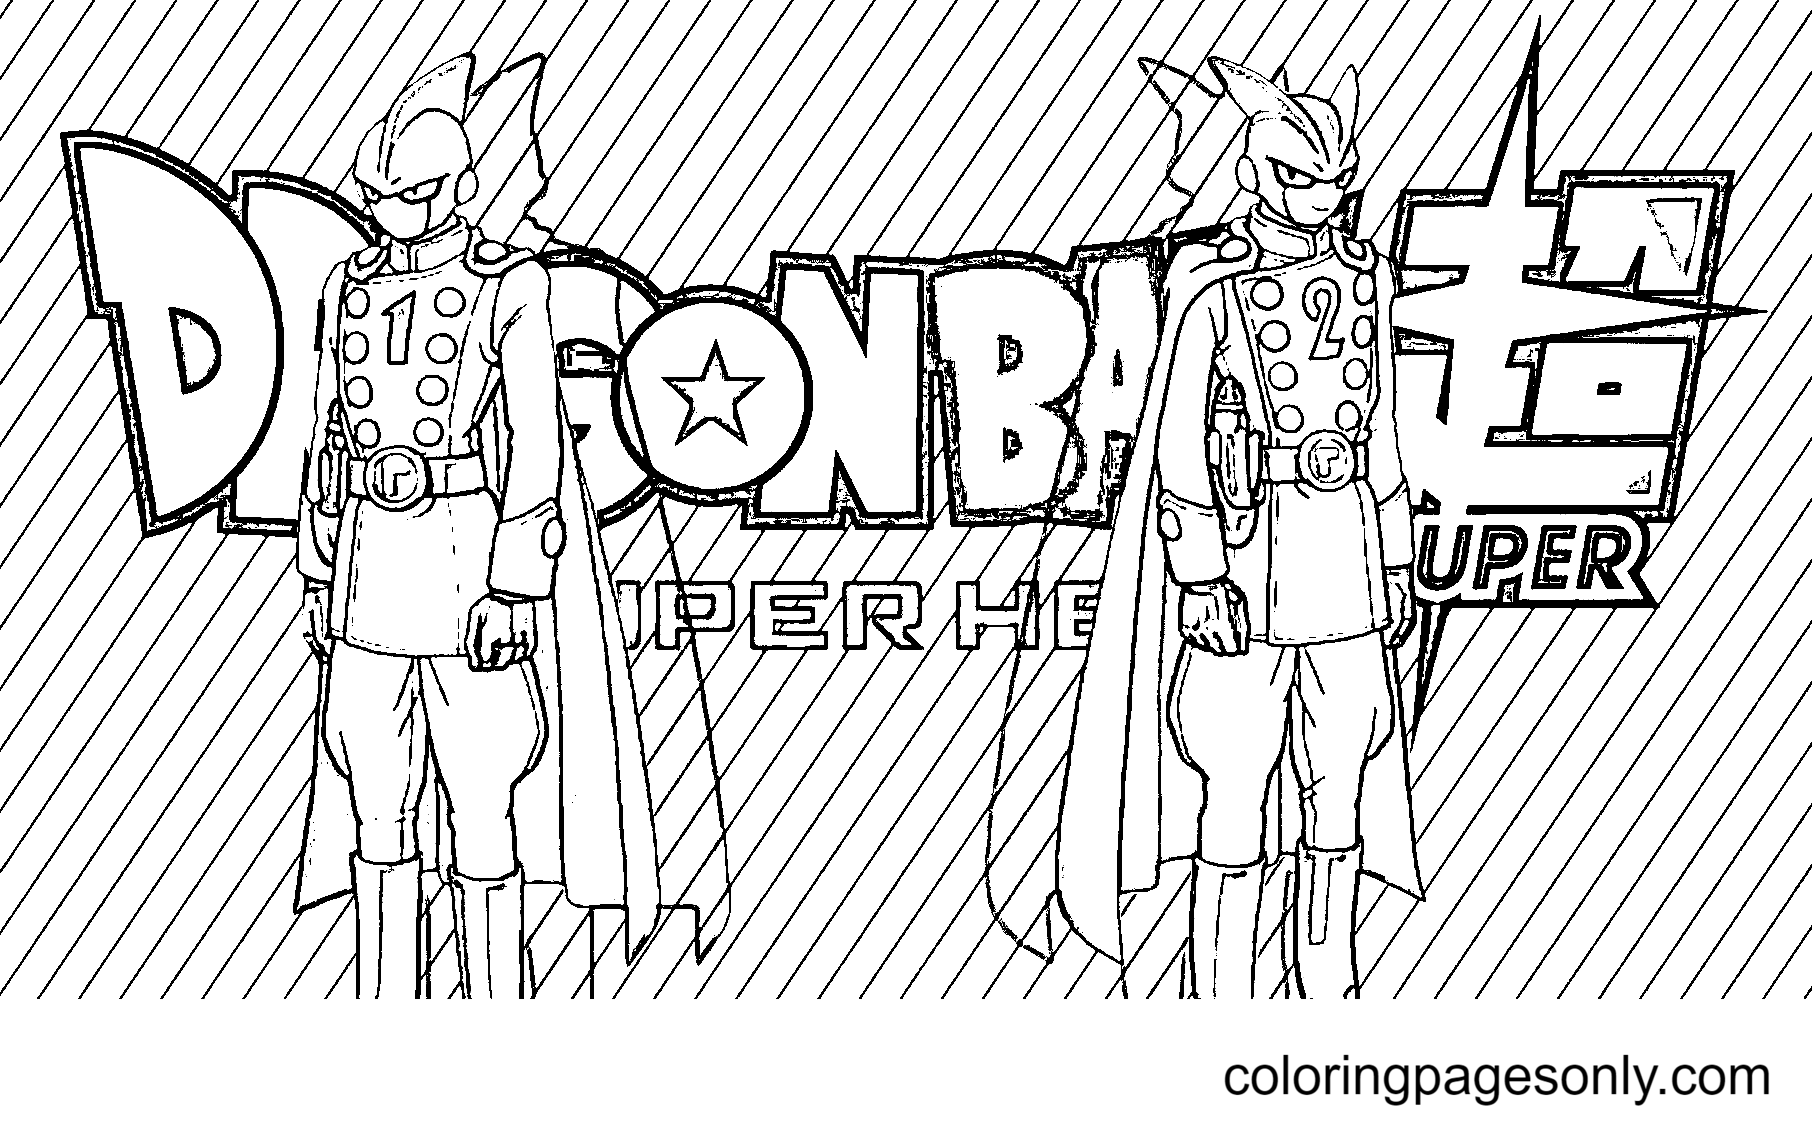 Dragon Ball Super Super Hero Anime Coloring Pages